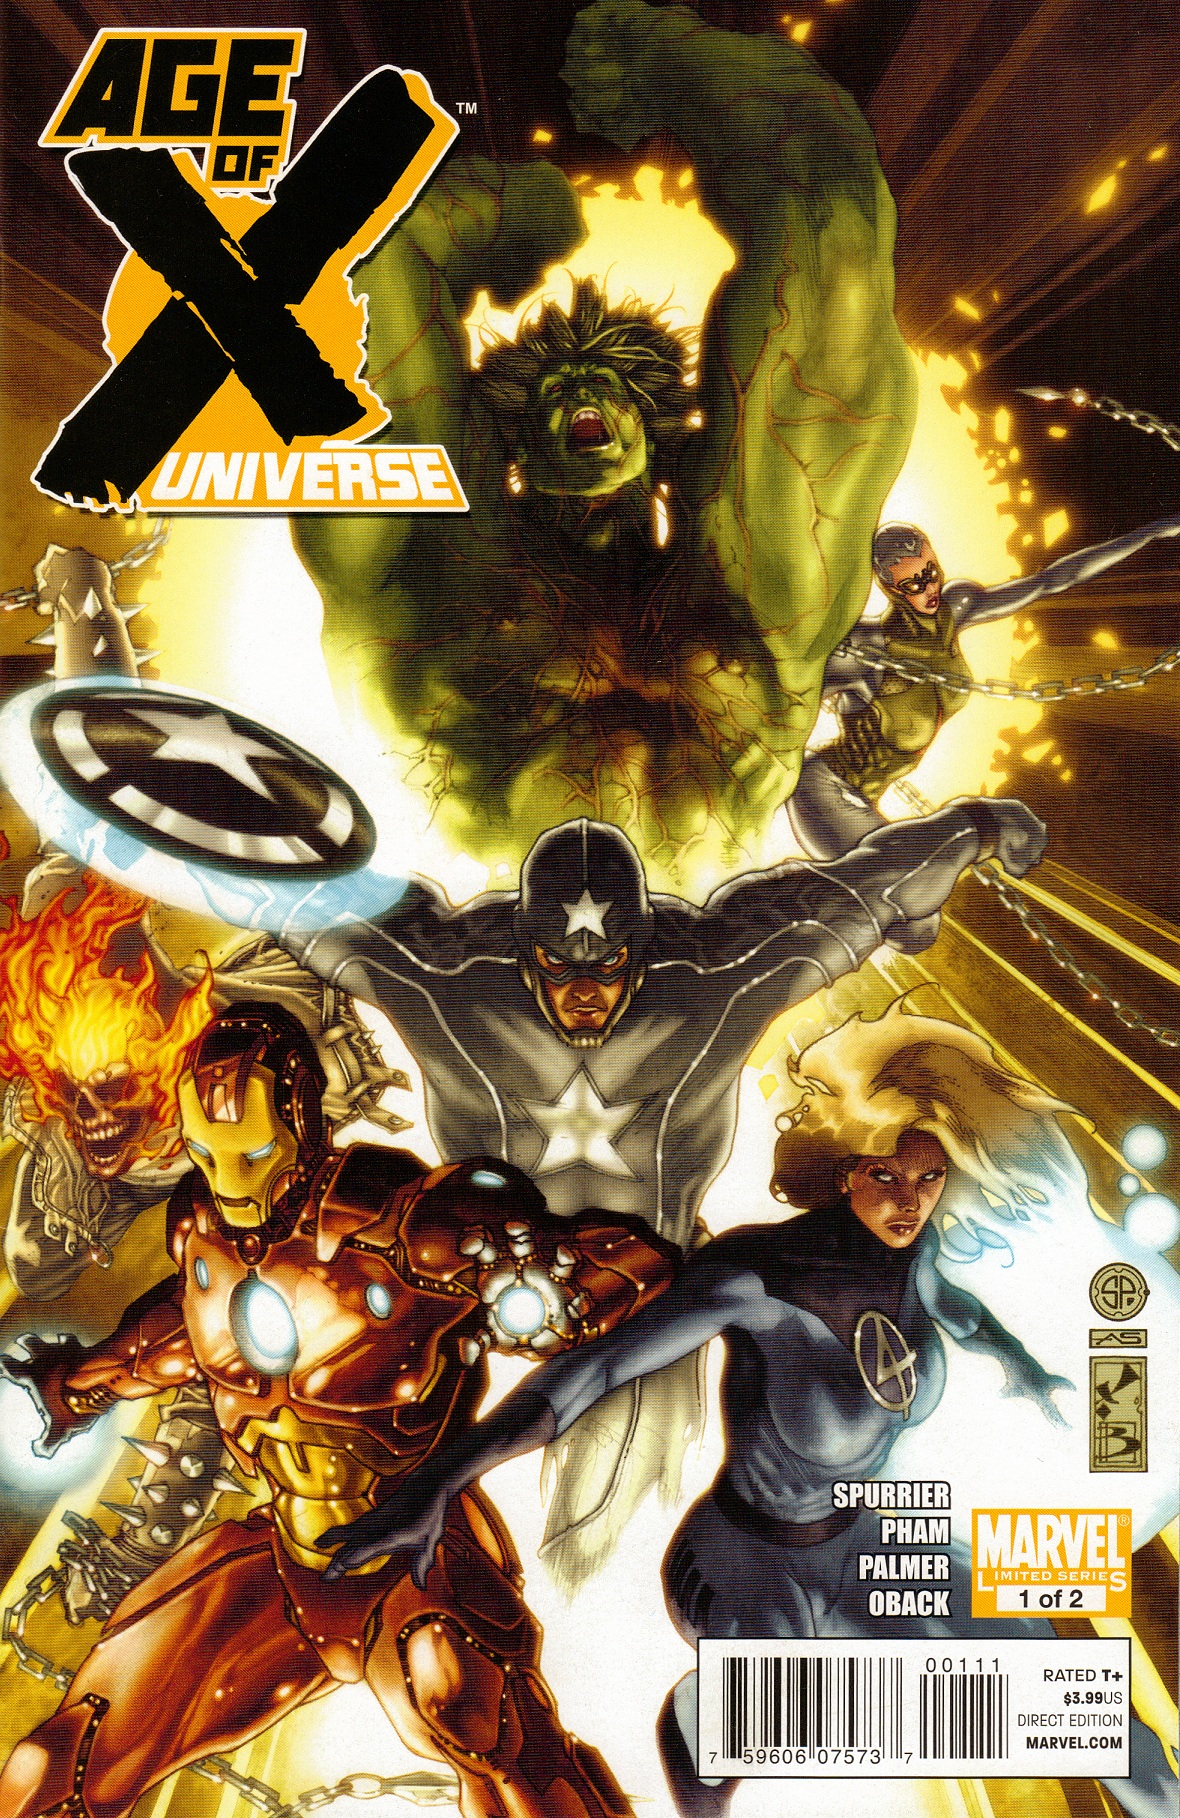 Age of X Universe Vol 1 1 | Marvel Database | FANDOM powered by Wikia1180 x 1818